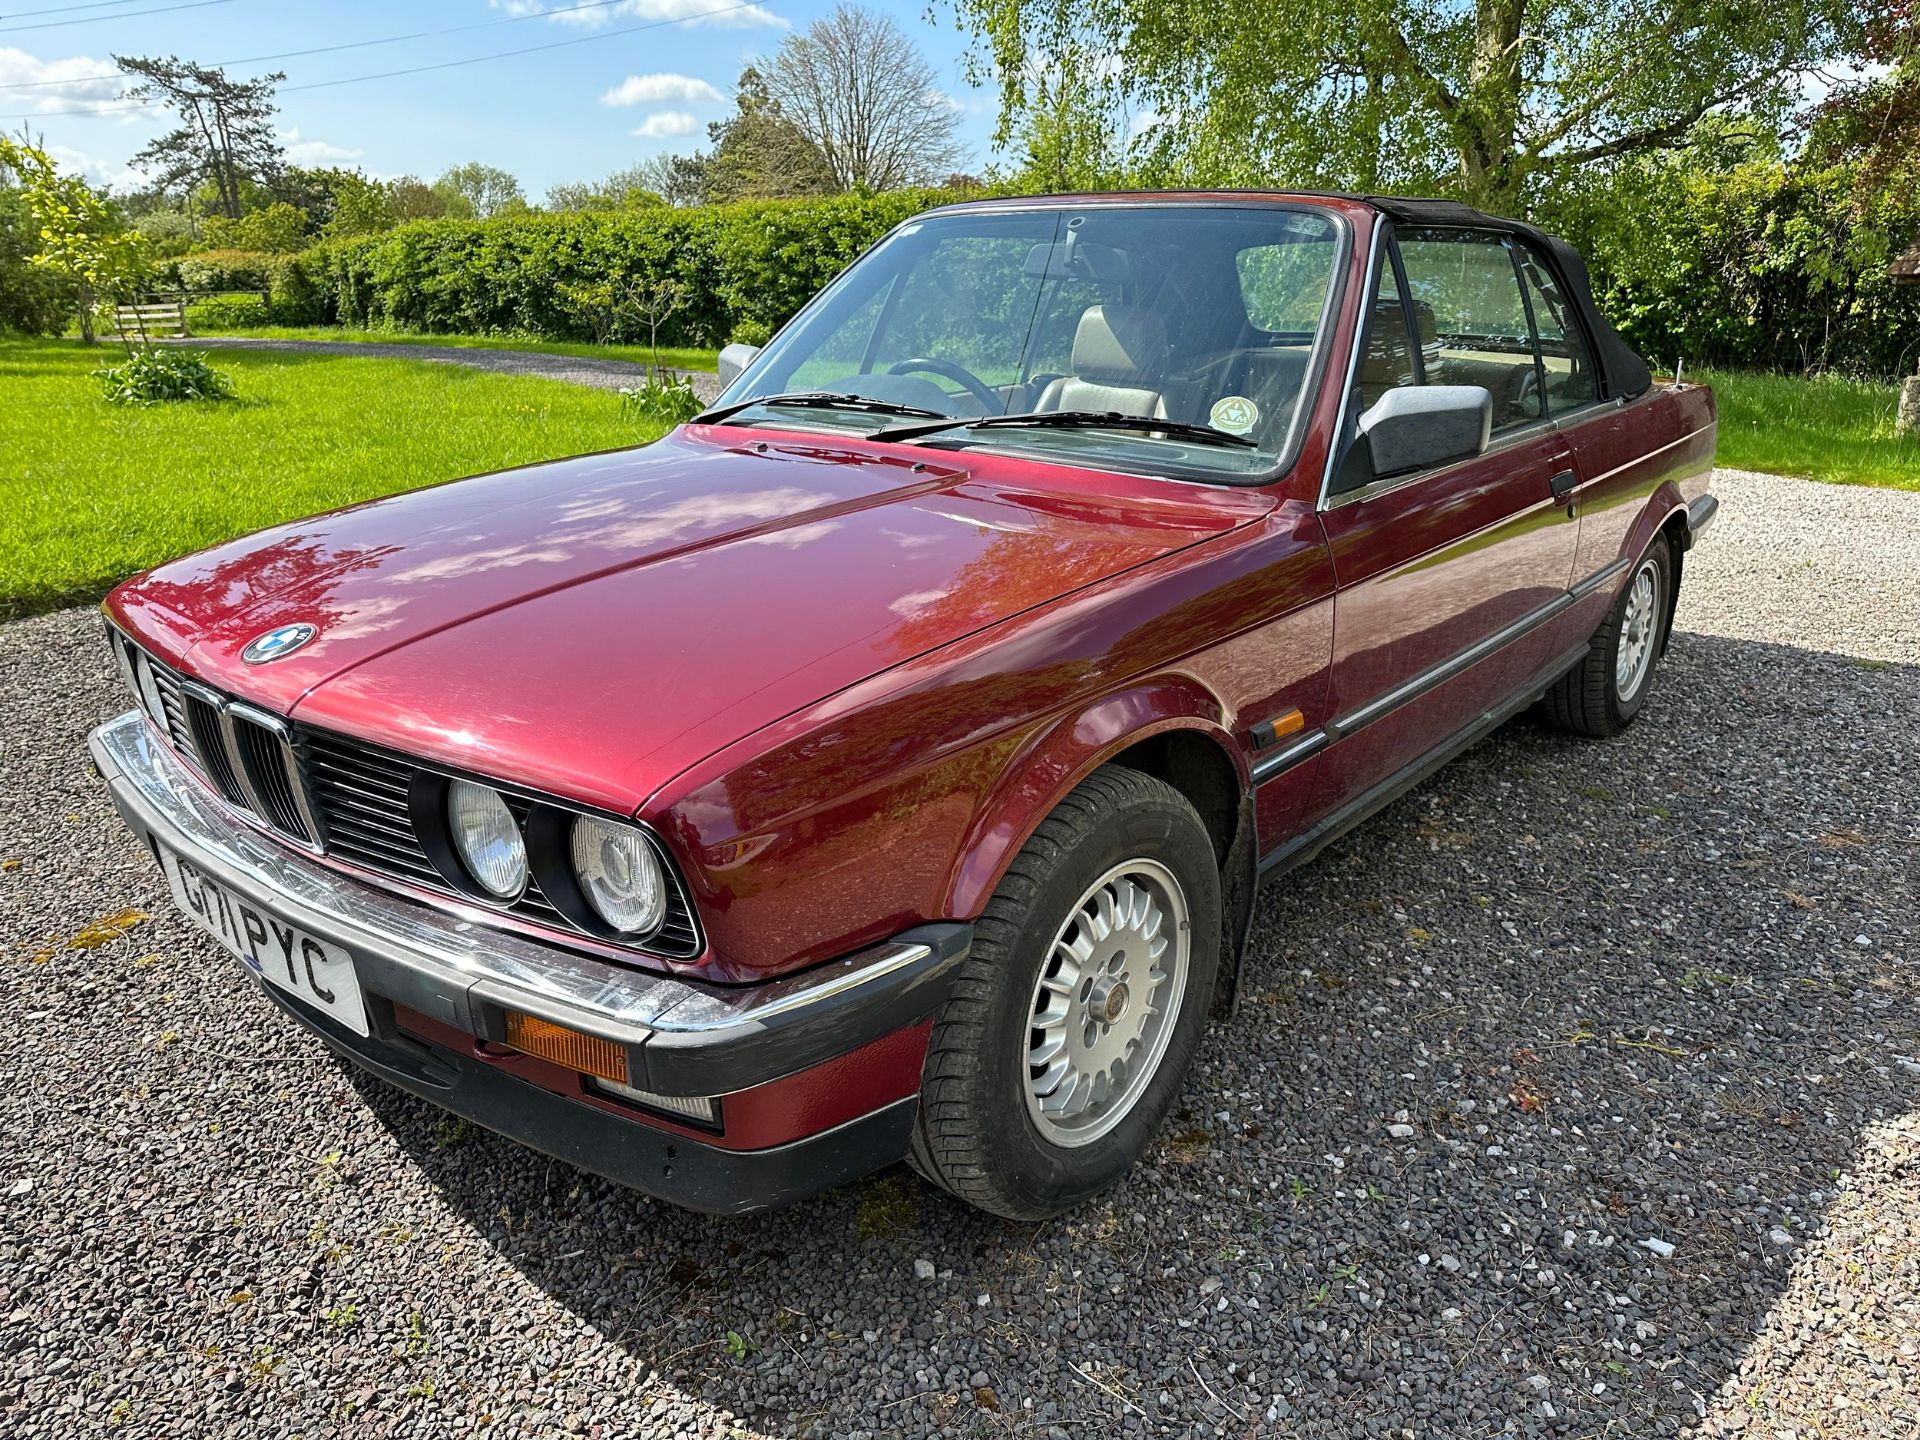 1990 BMW 325i Convertible Registration number G171 PYC Chassis number WBABB12070LB95832 Engine - Image 2 of 67